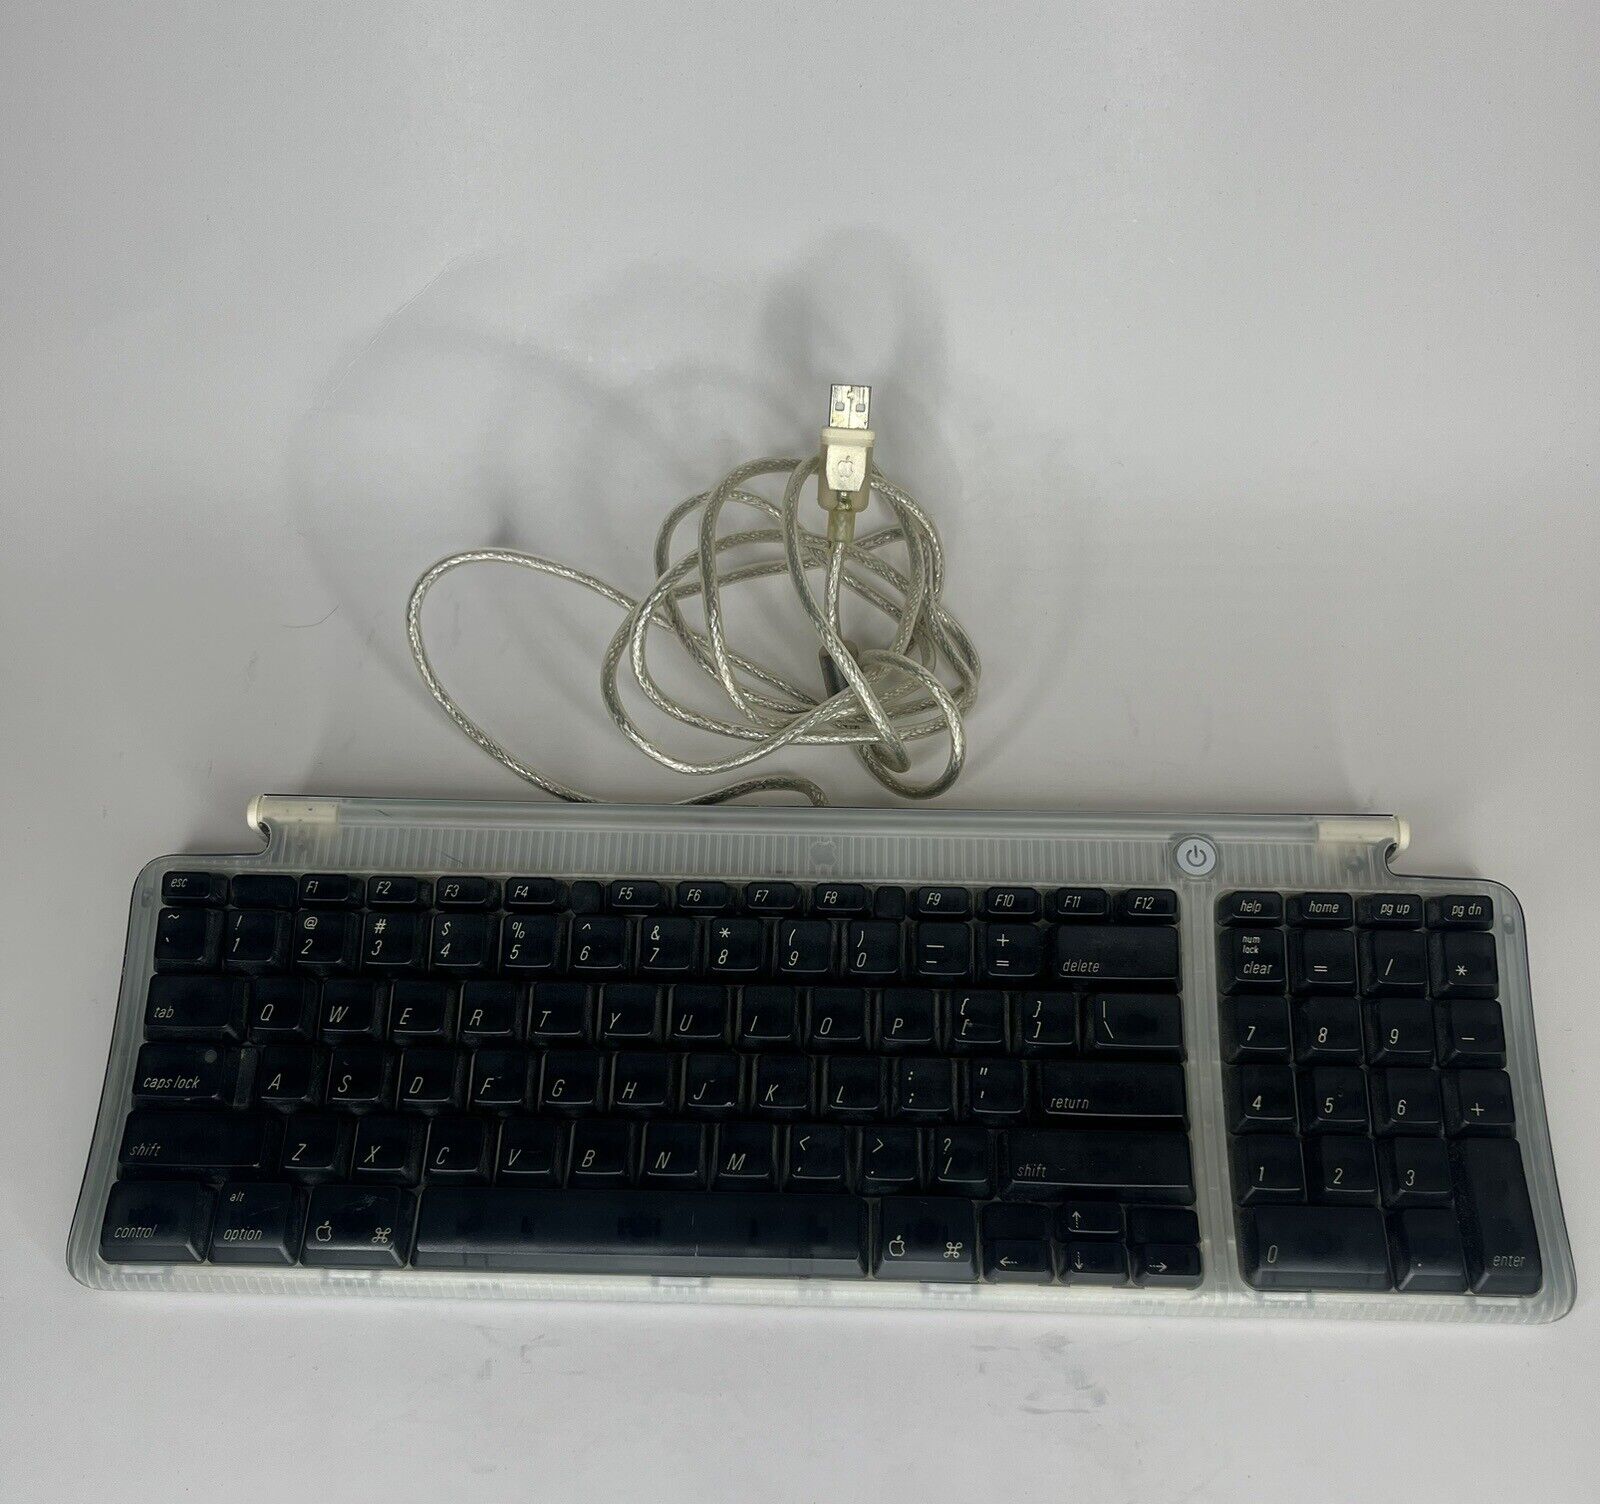 Vintage Retro Apple M2452 Usb Keyboard Aqua color Great Working Condition Tested